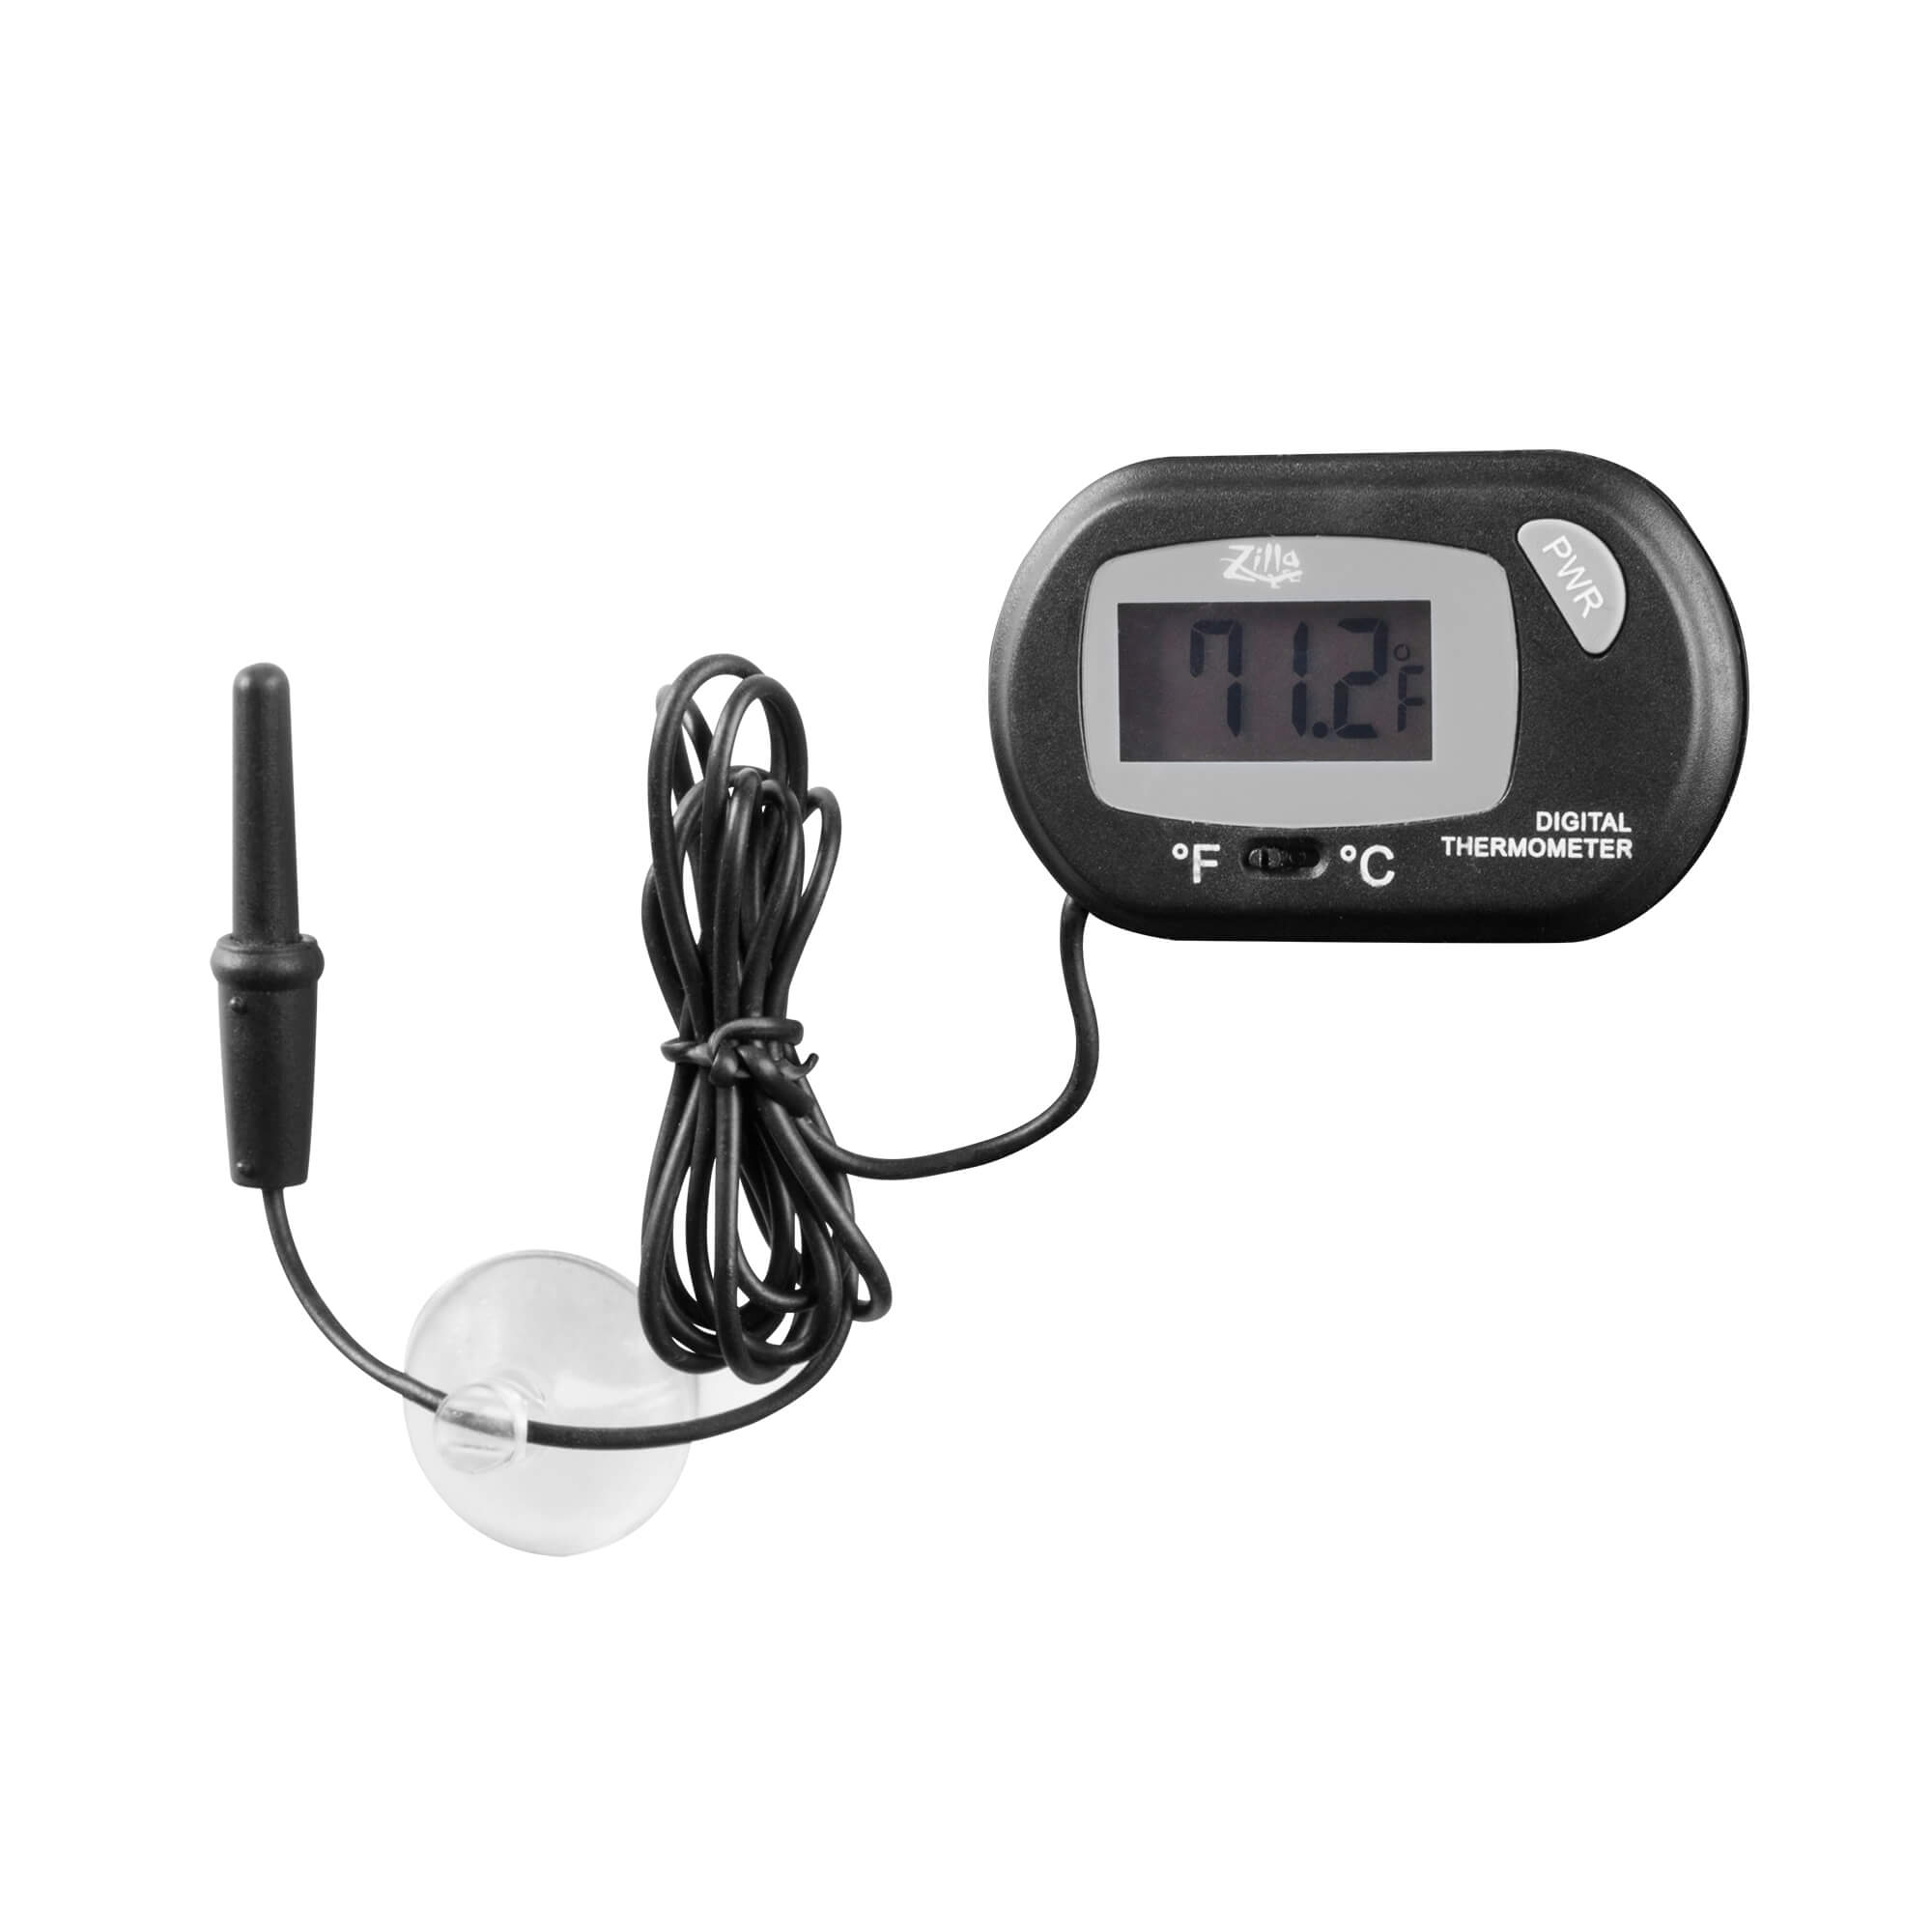 Digital Thermometer for Environment Control